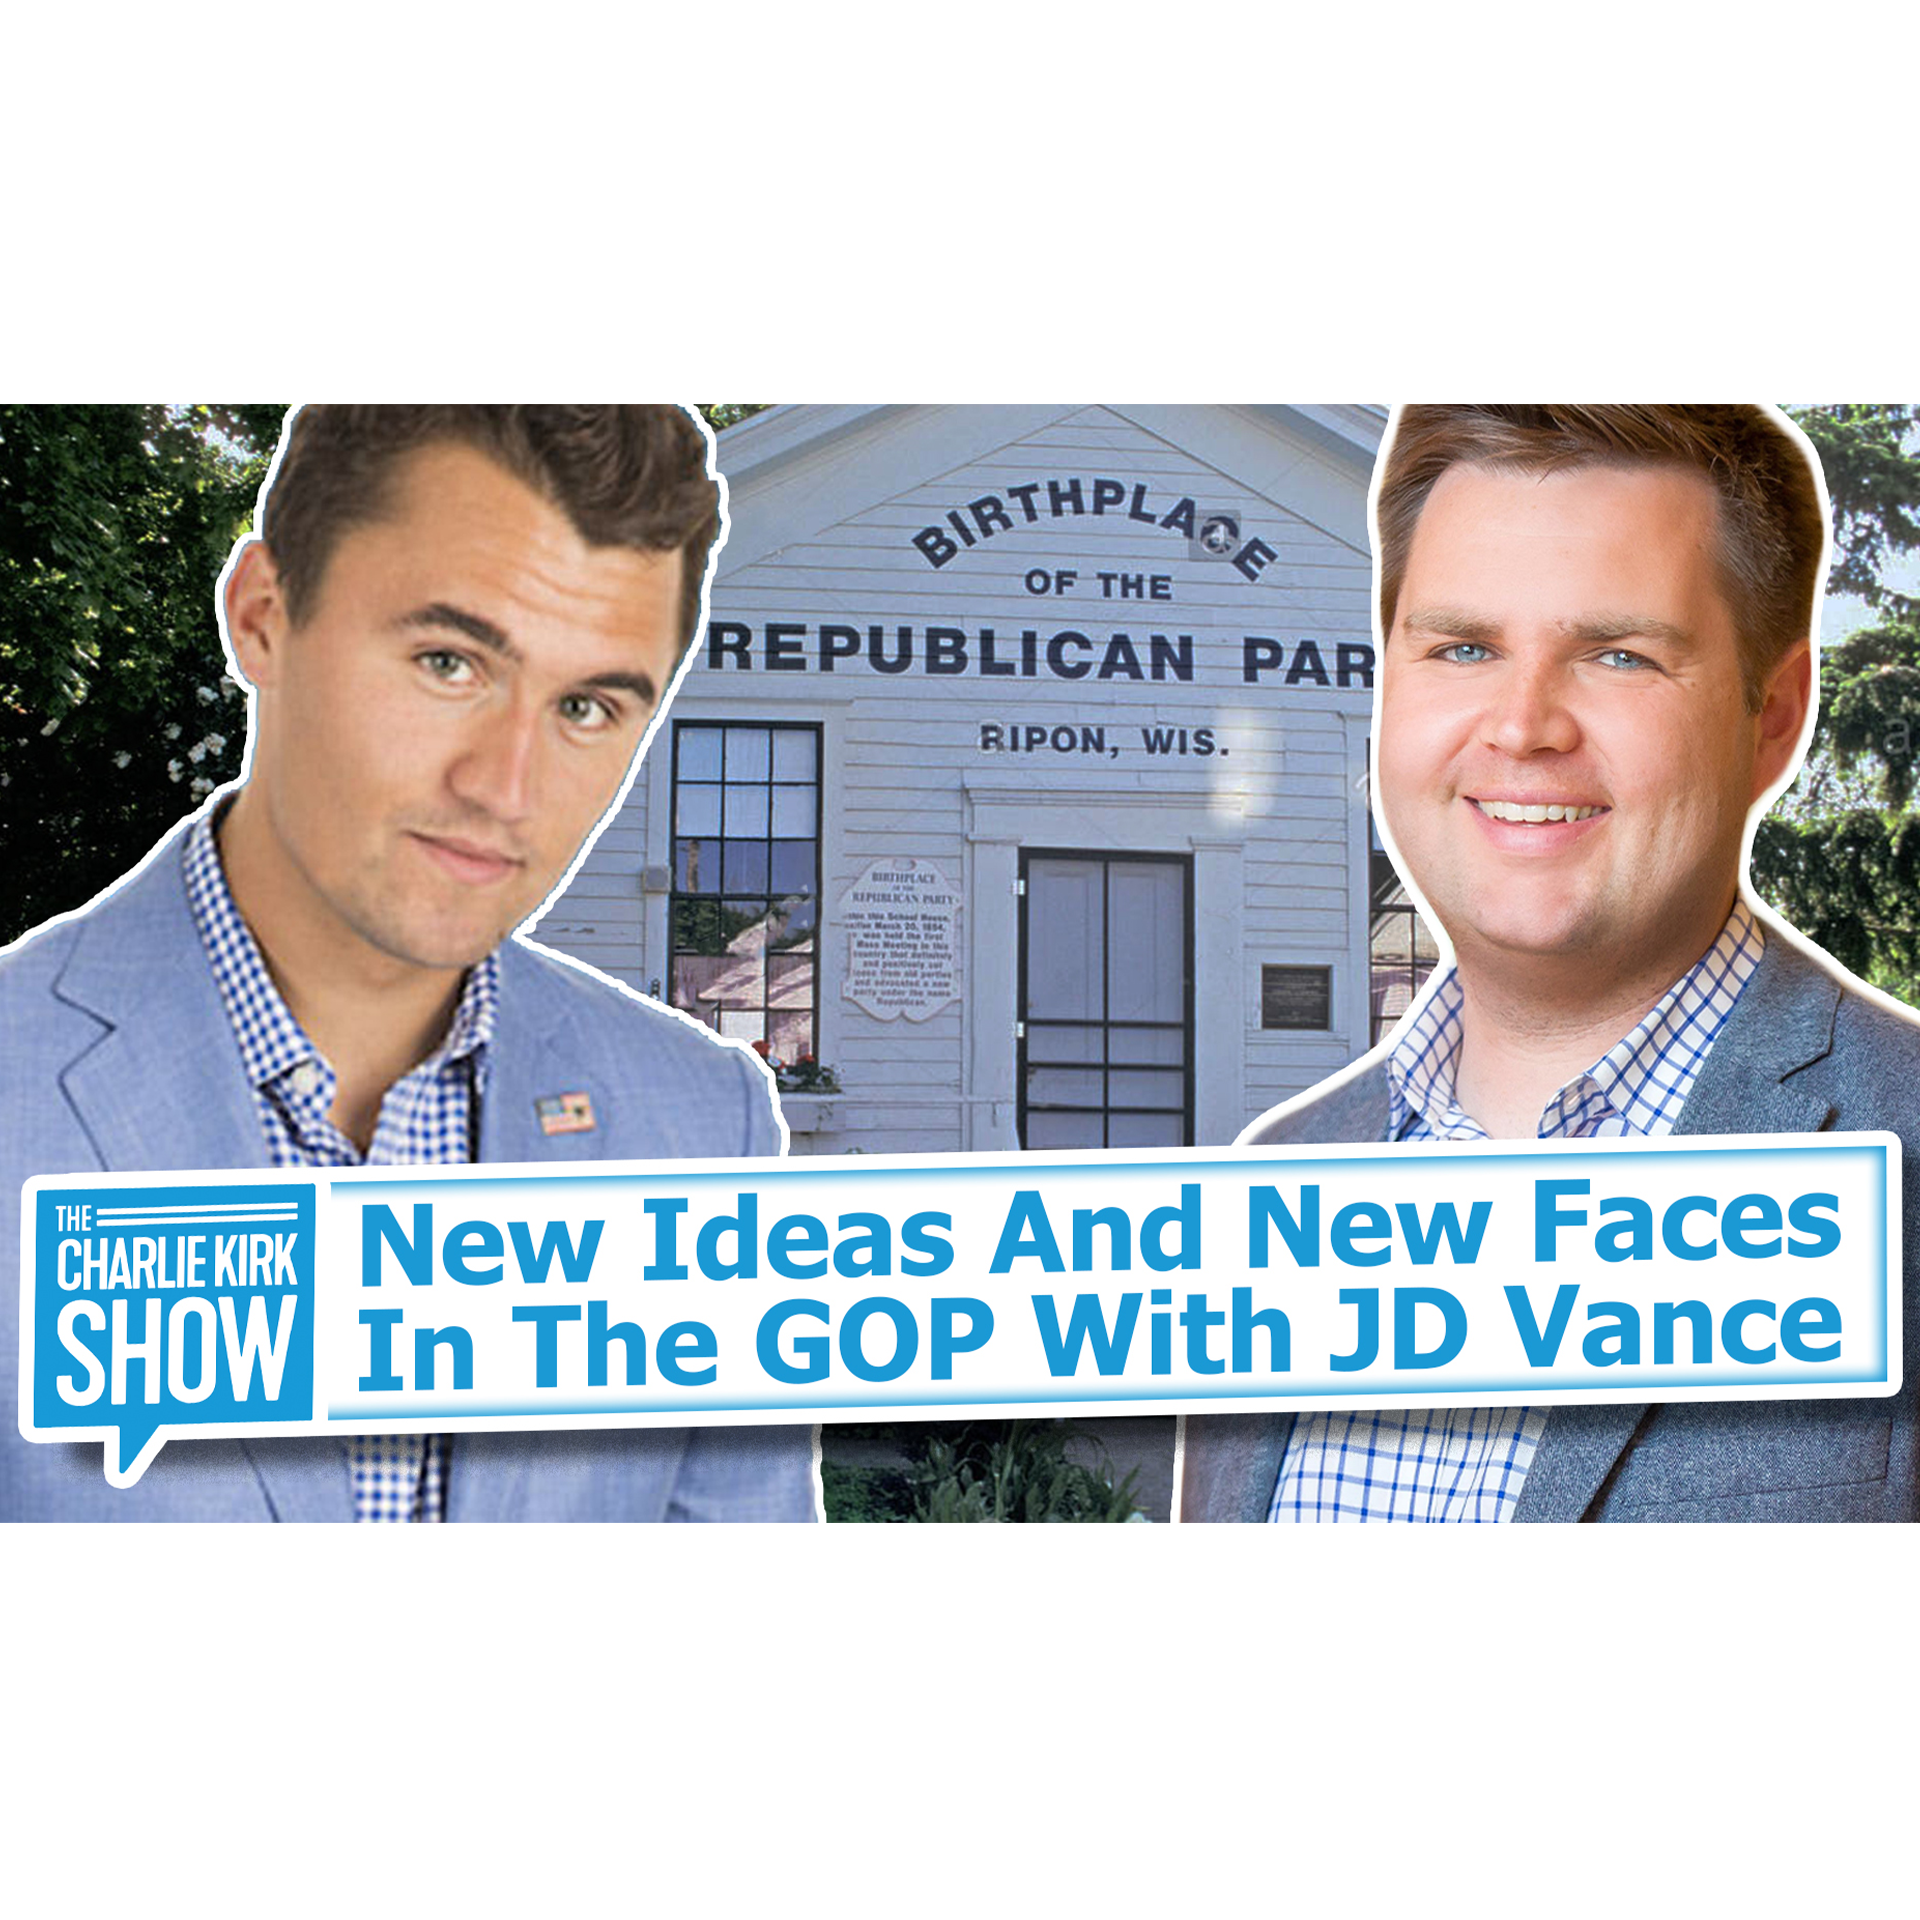 New Ideas and New Faces in the GOP with Hillbilly Elegy’s JD Vance